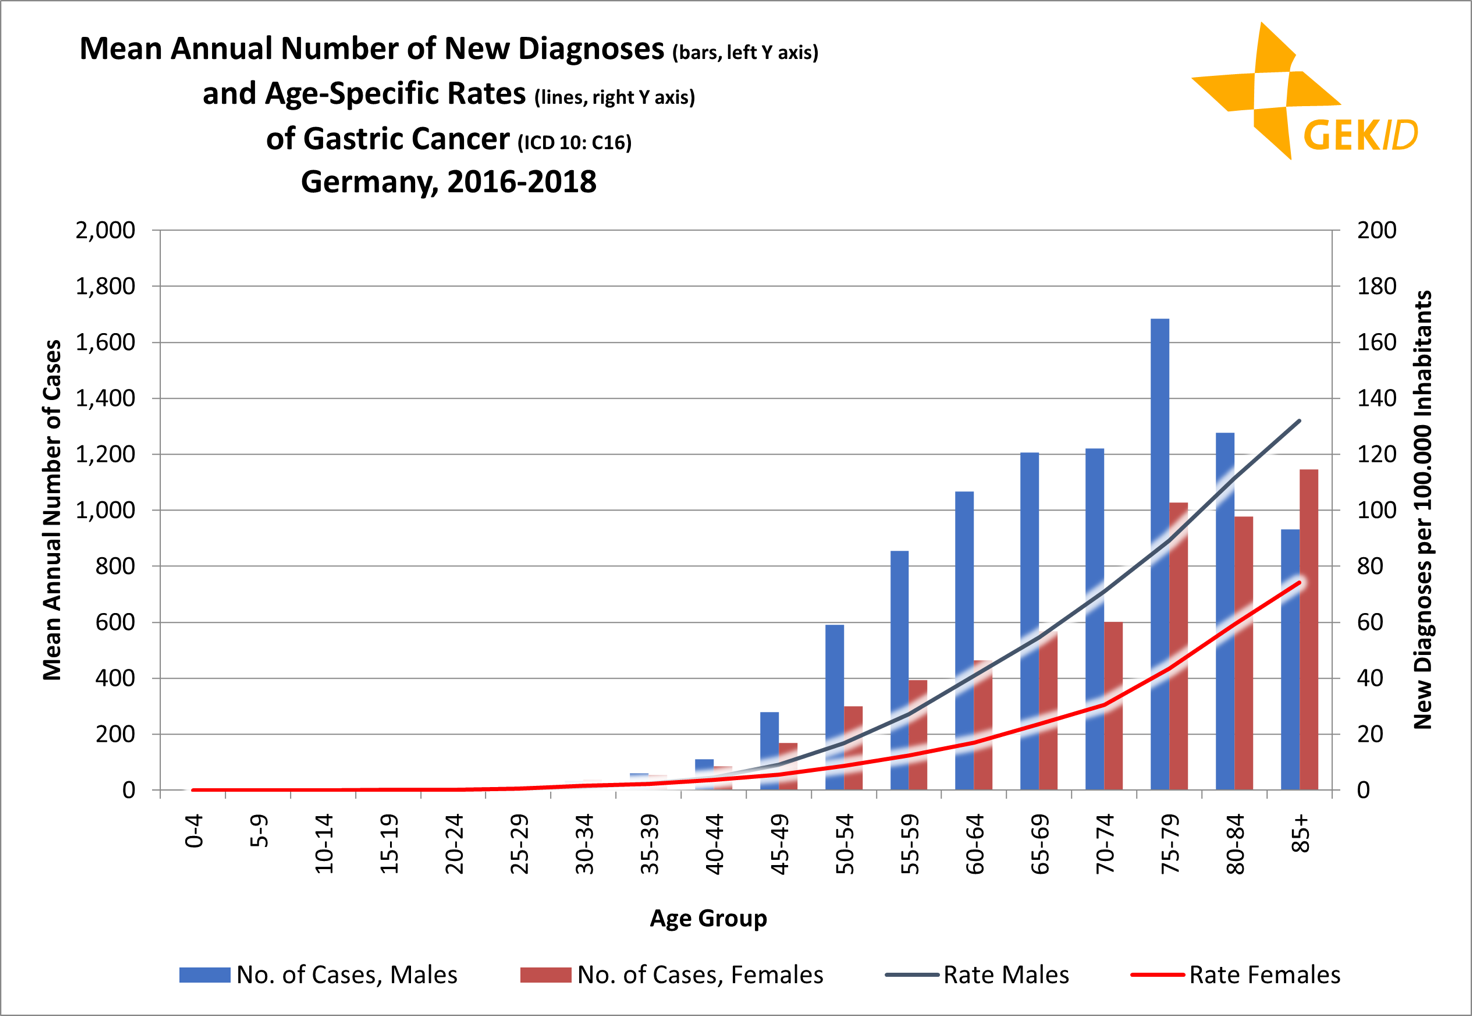 Age distribution of gastric cancer incidence (ICD 10: C16) - age-specific case numbers and rates 1